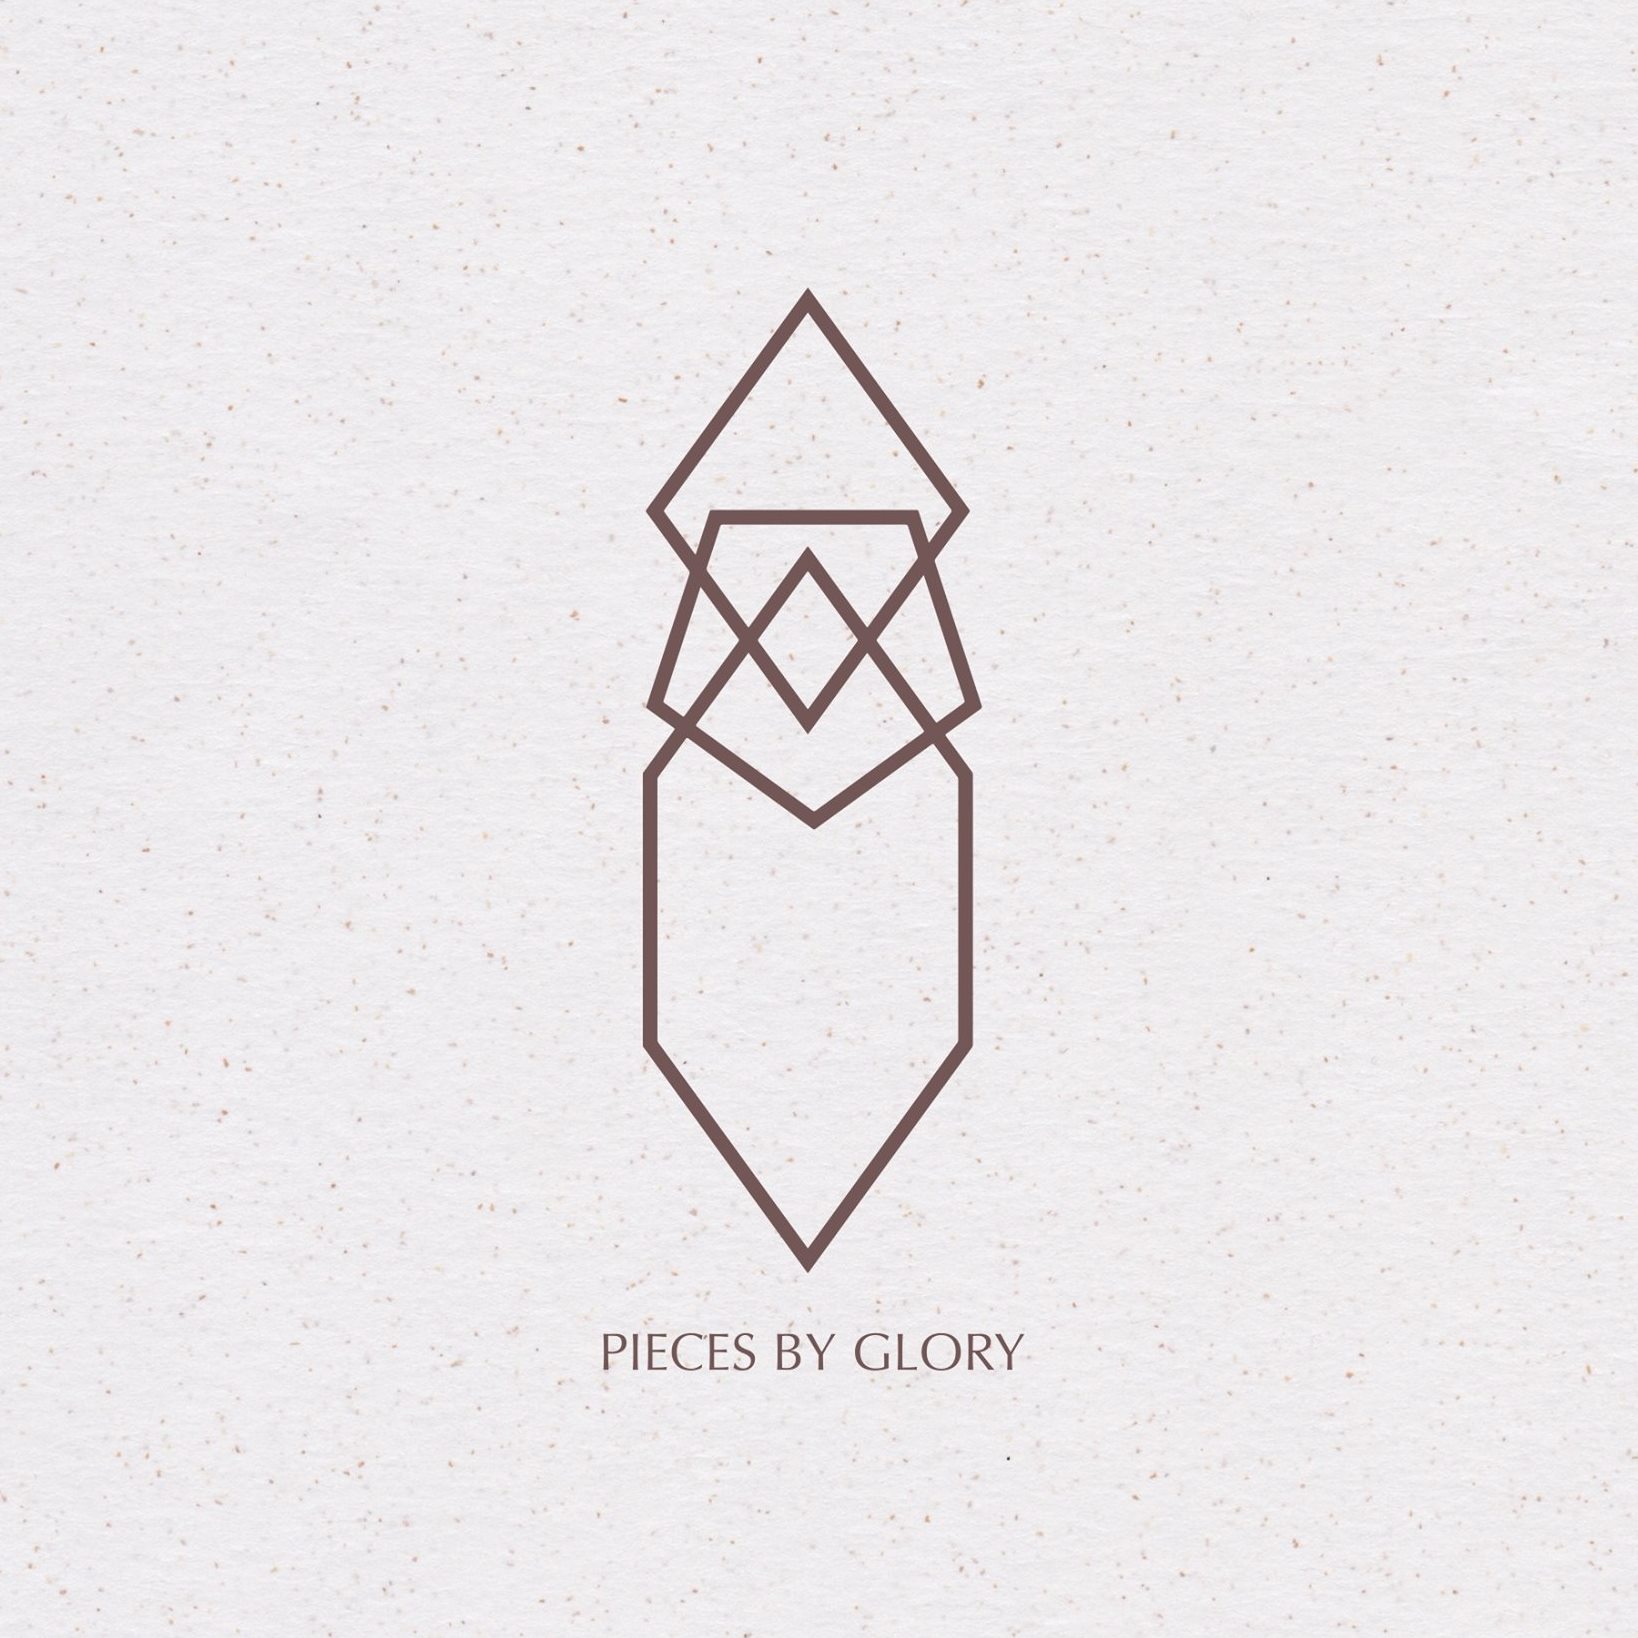 Pieces by Glory